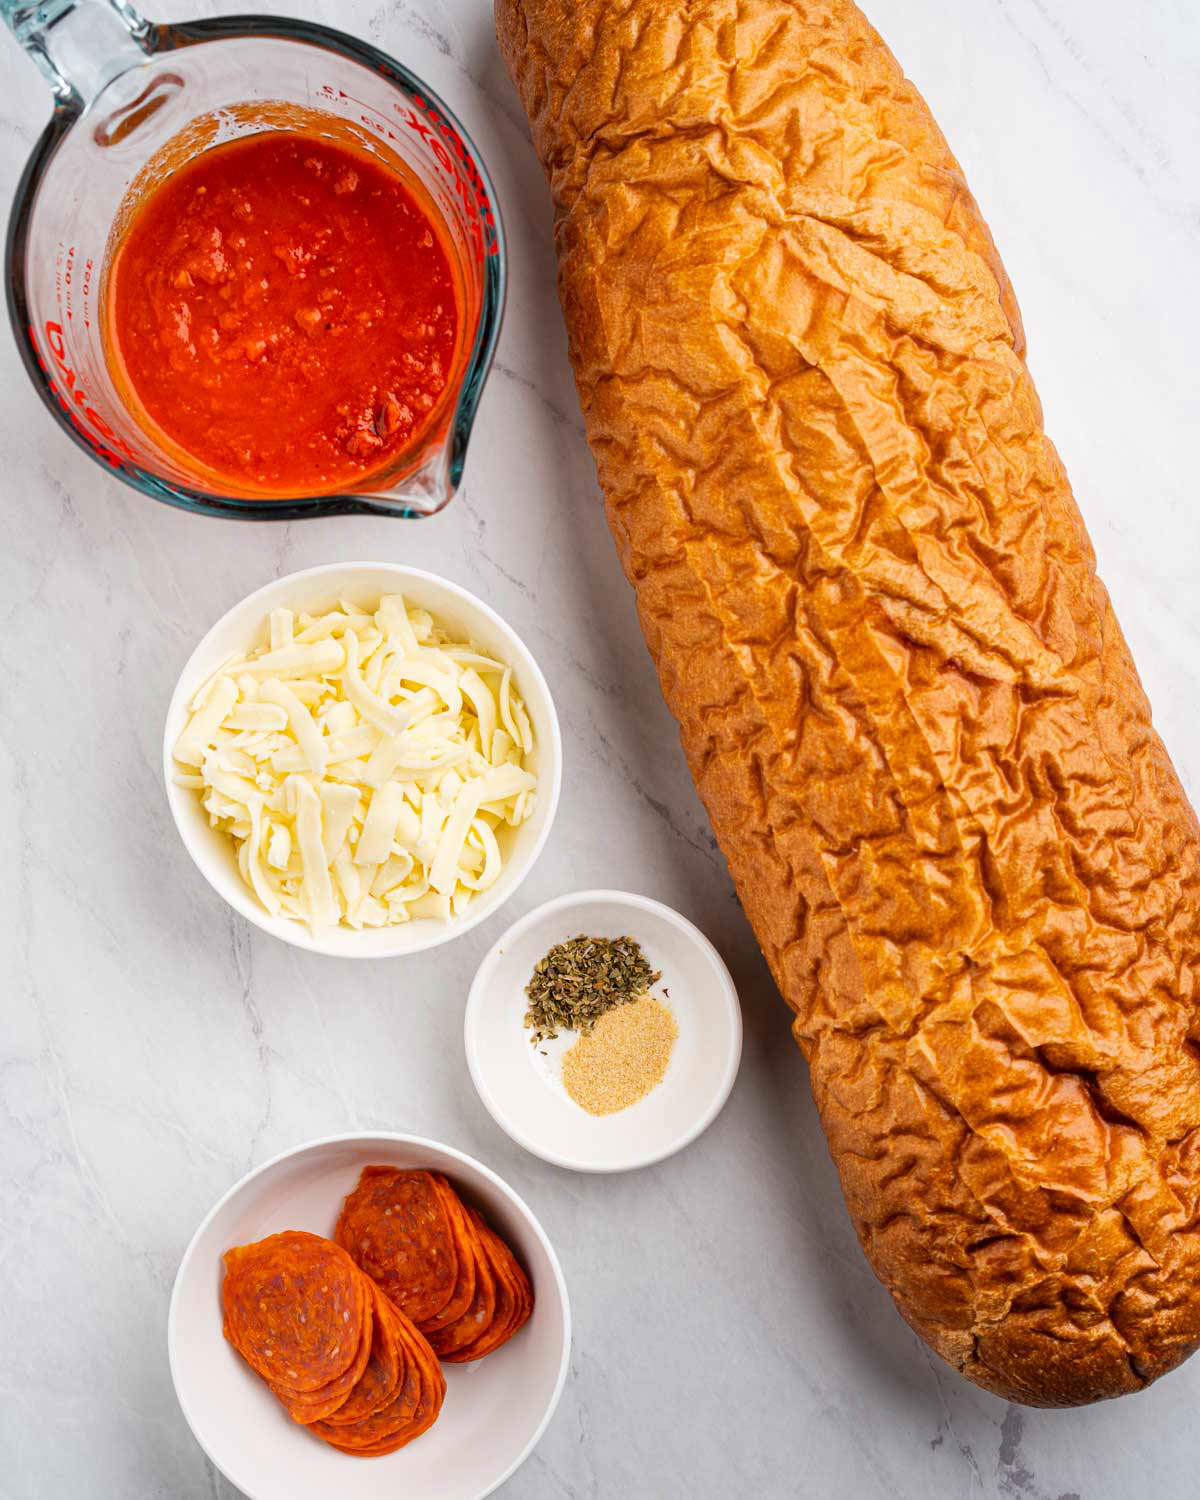 A loaf of french bread is shown, along with spices, cheese, sauce and pepperonis in individual bowls.